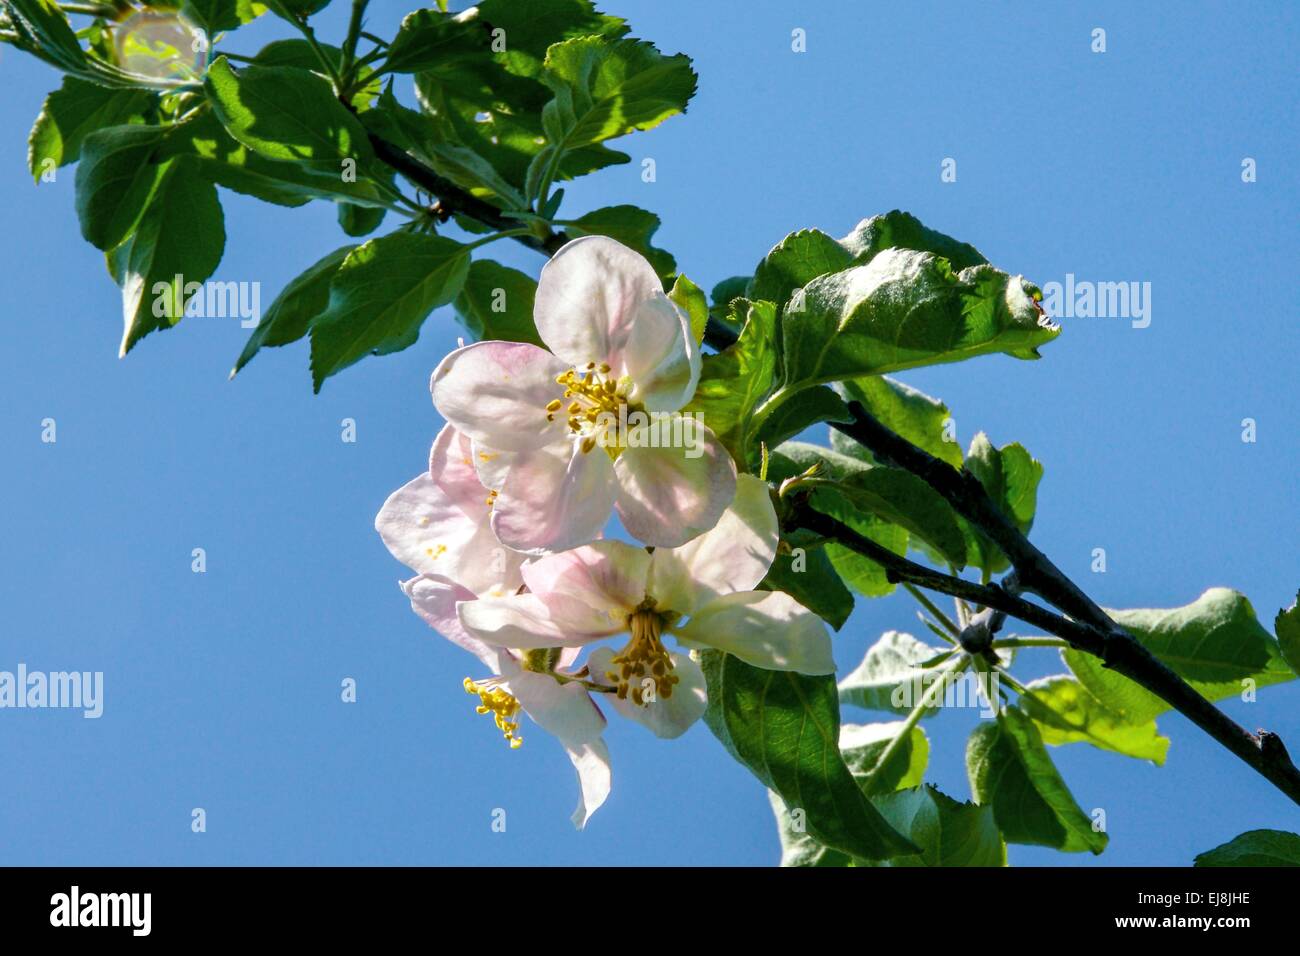 Quince tree blossom Stock Photo